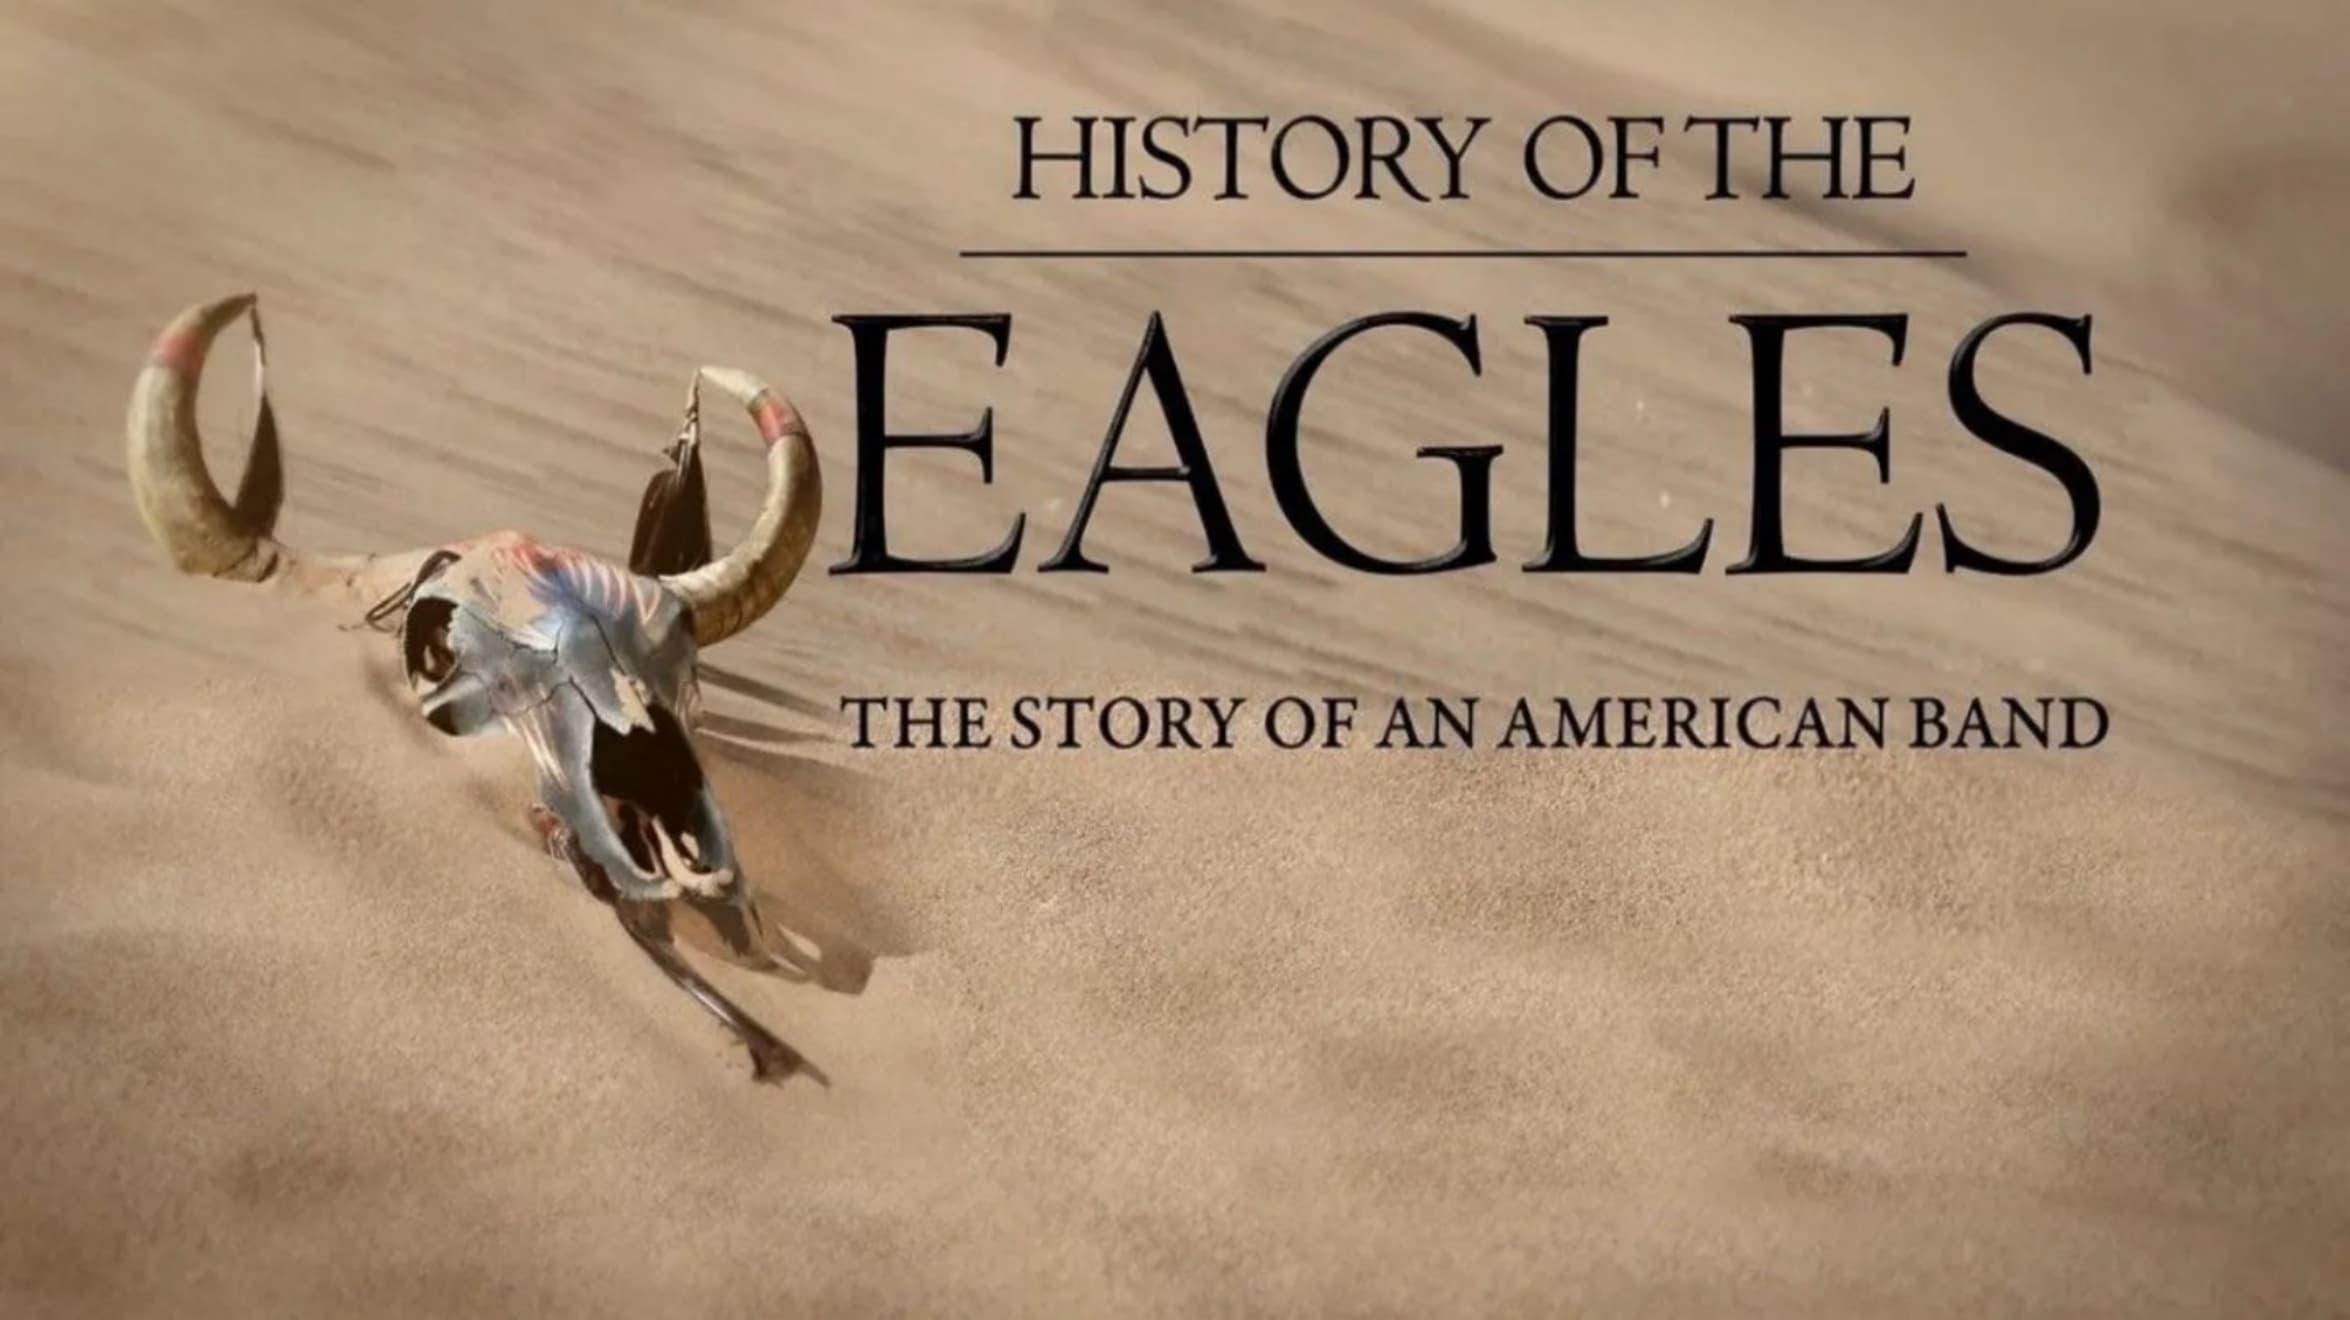 History of the Eagles backdrop